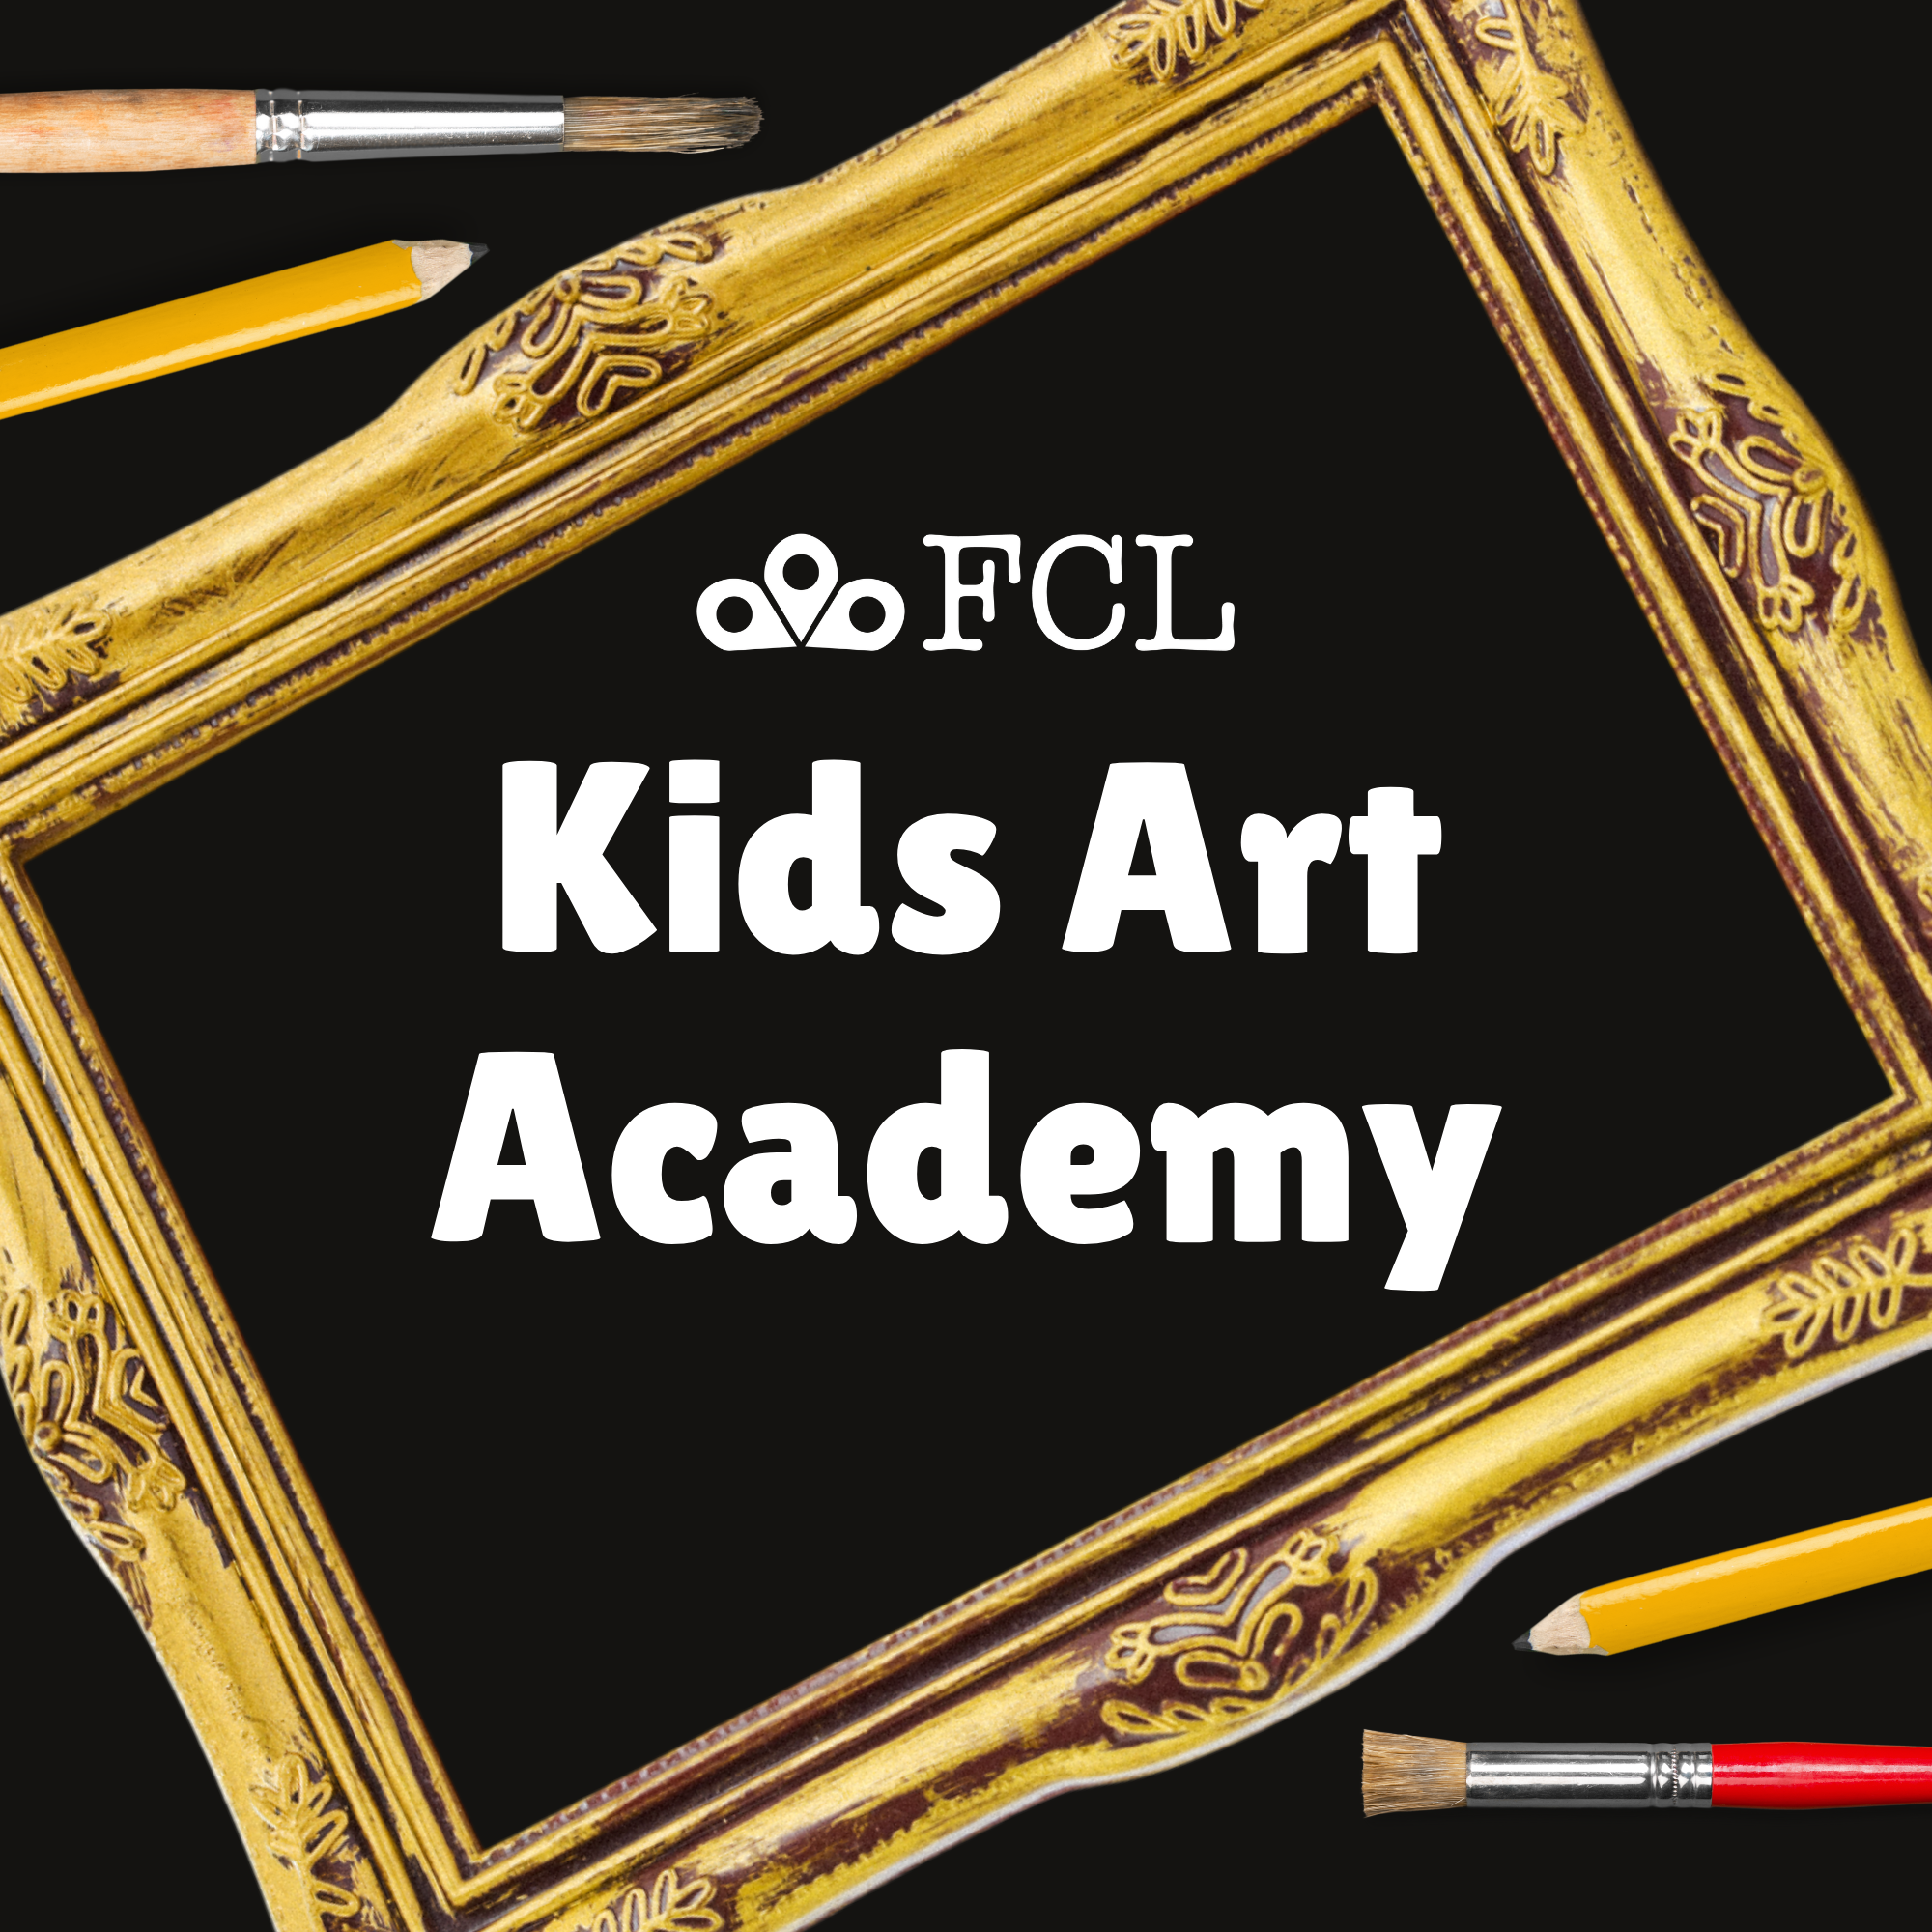 "Kids Art Academy" written in plain text; an art frame and art tool in shown in the background